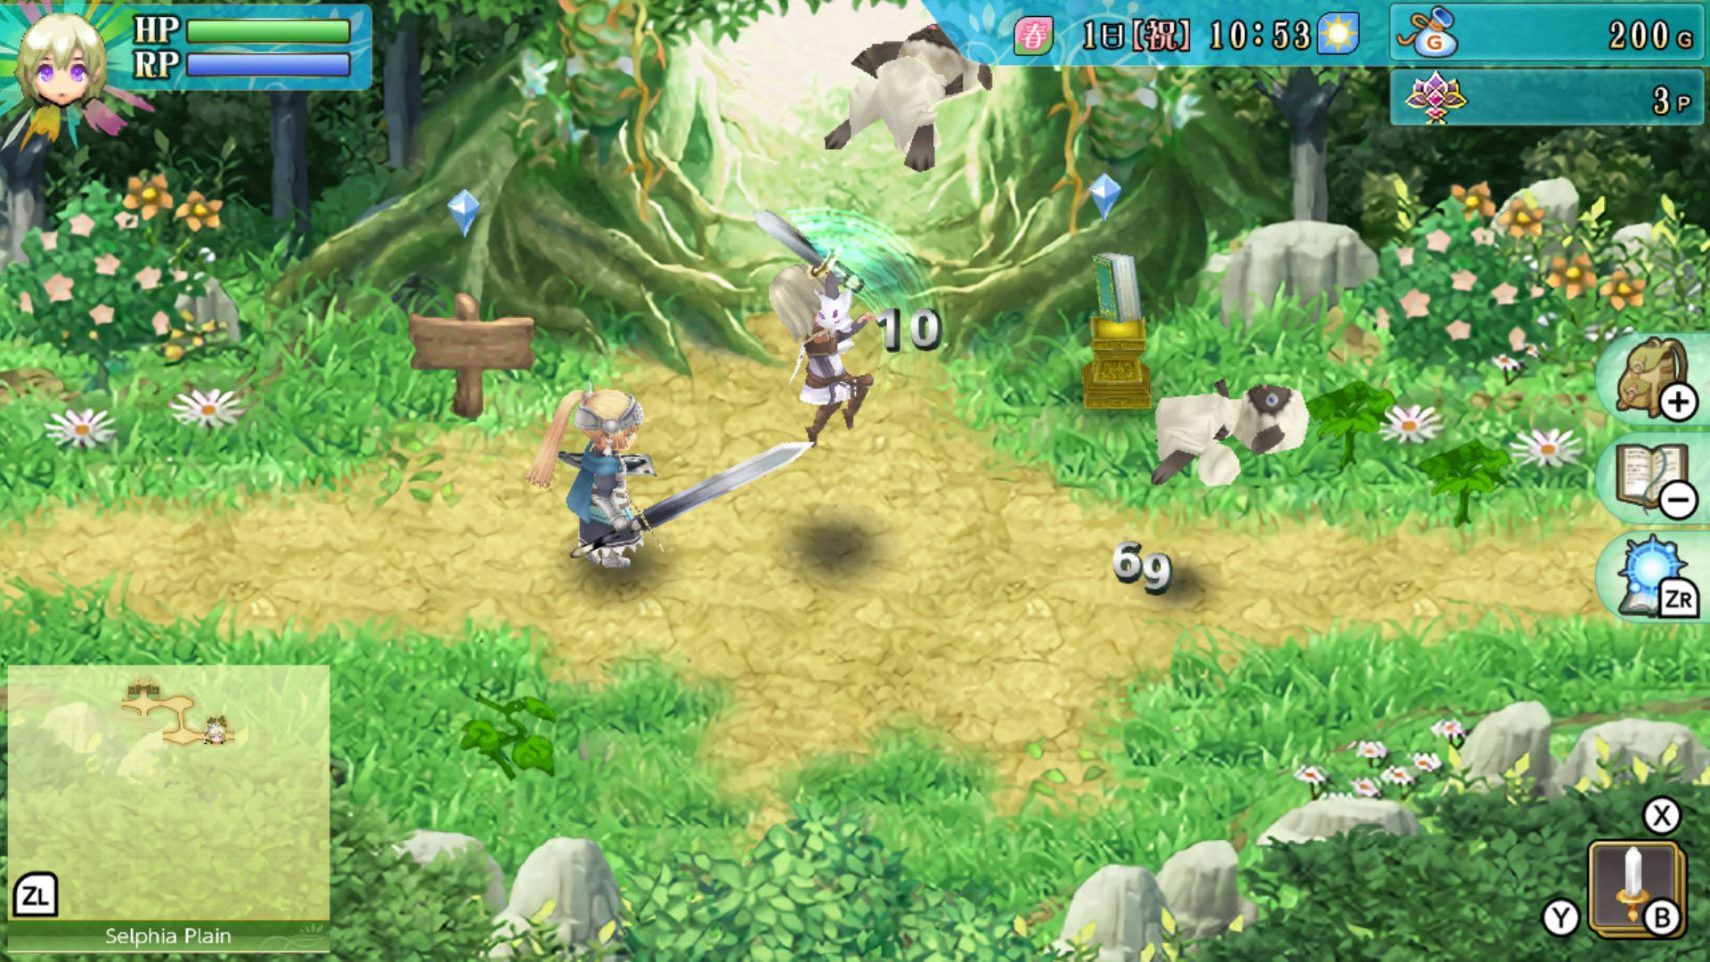 xseed-explains-rune-factory-4-localization-delays-were-caused-by-programming-complications